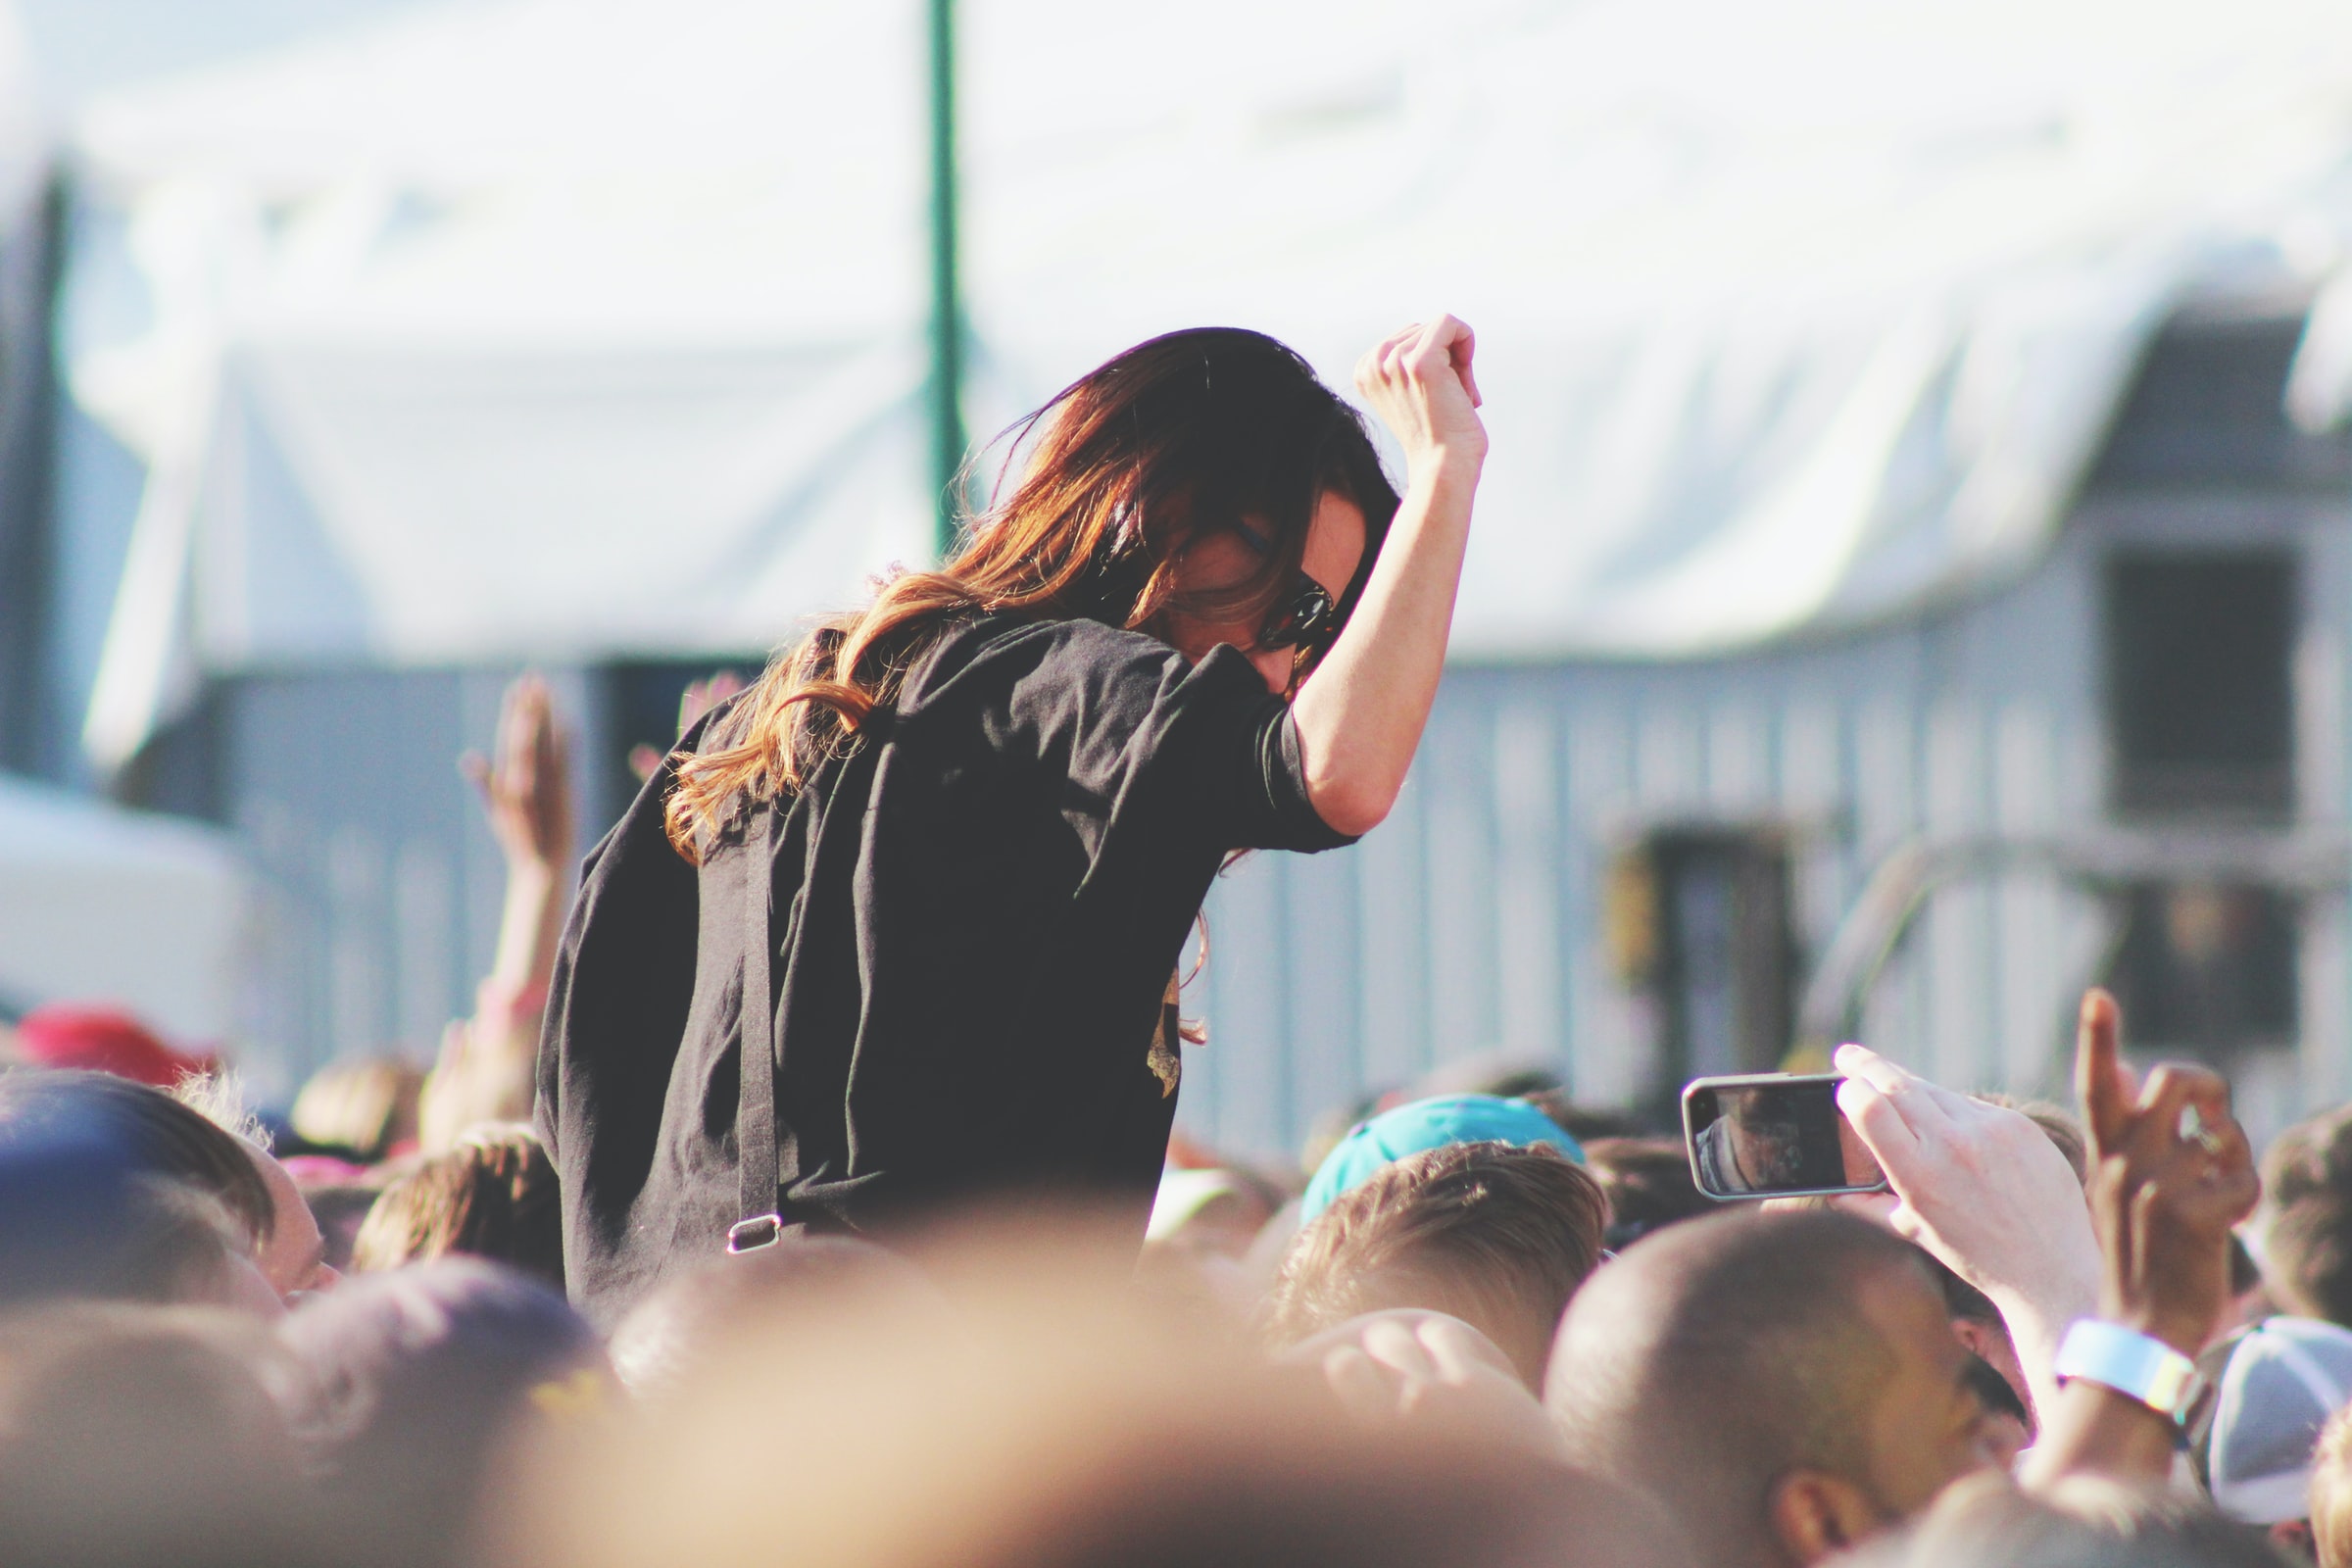 A woman with sunglasses dances on the shoulders at a festival, above the crowd.